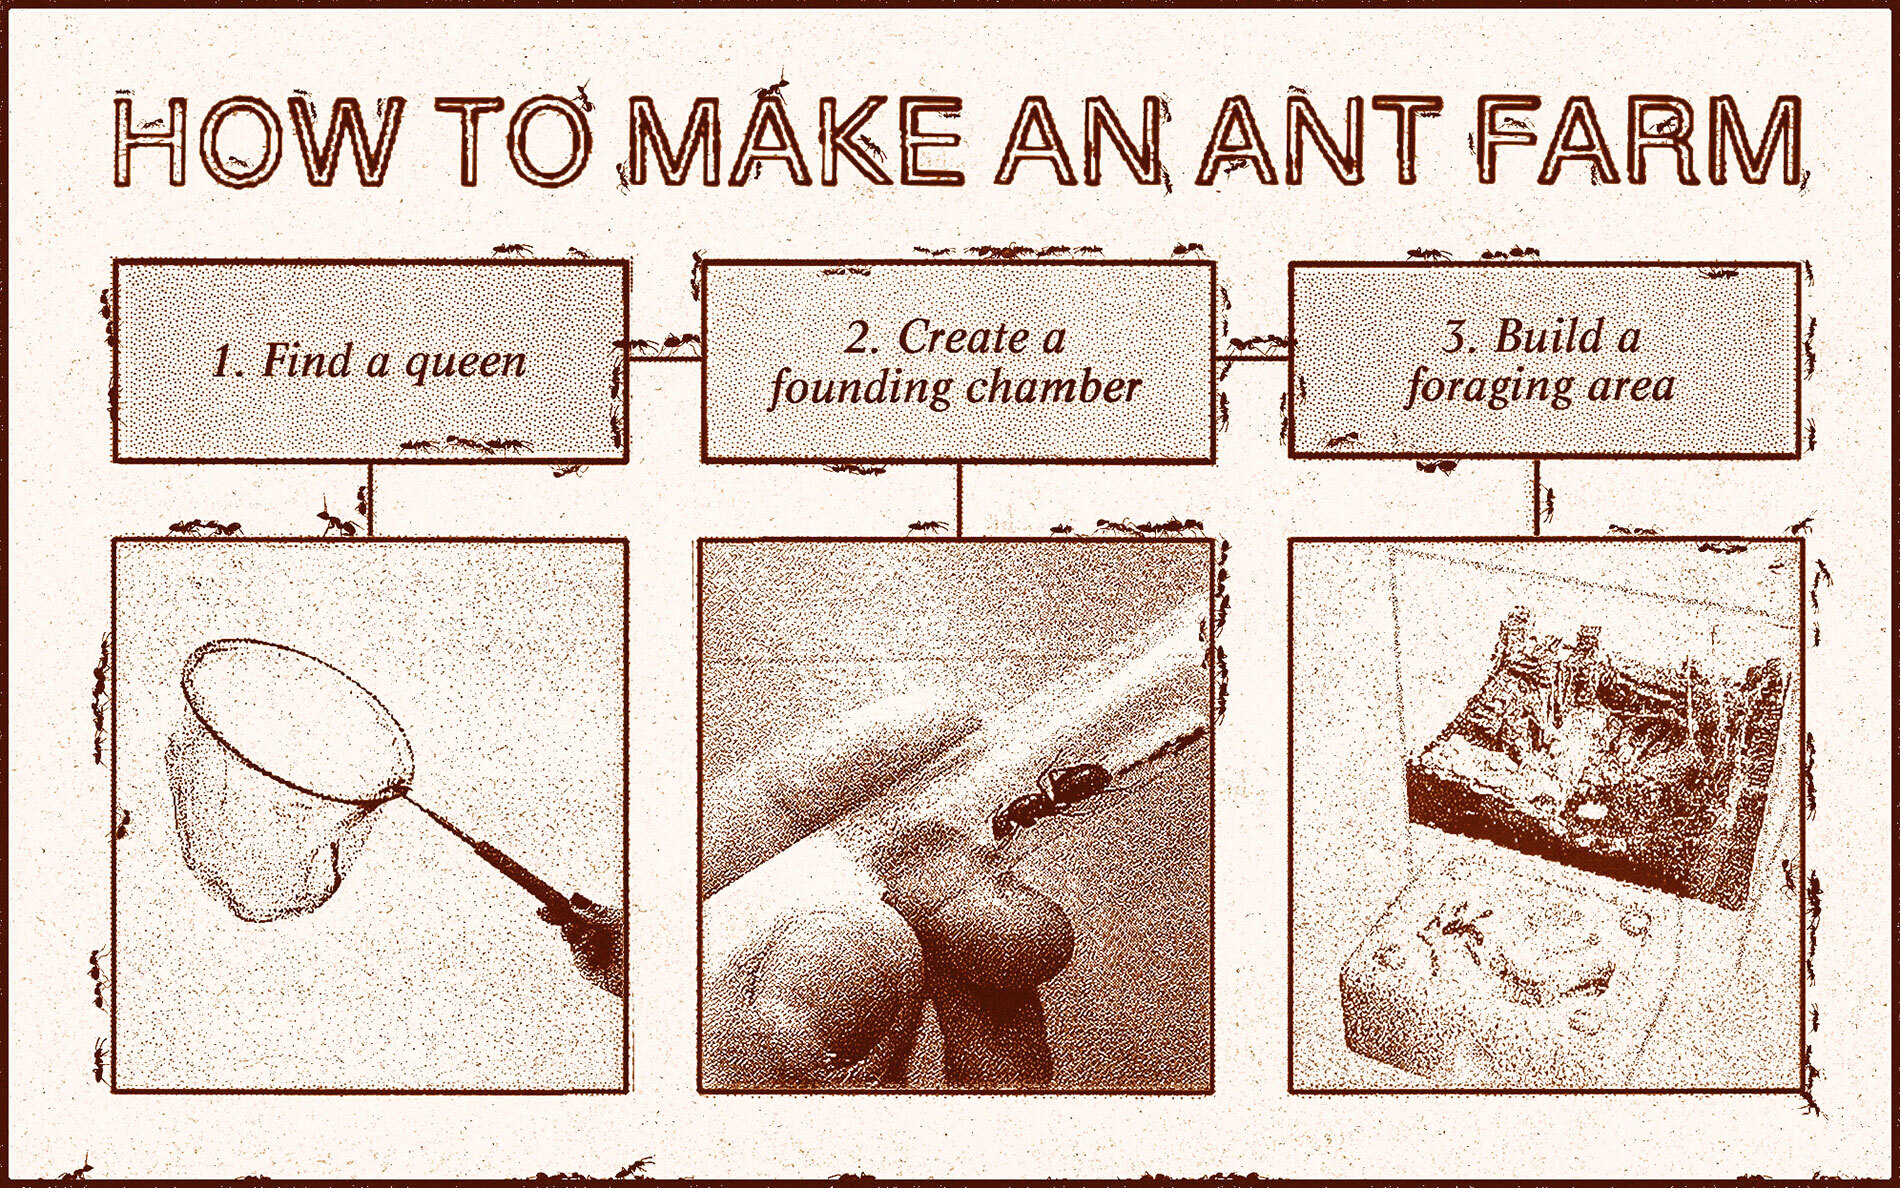 An infographic titled How to Make an Ant Farm, with three steps (Find a queen, Create a founding chamber, build a foraging area), and three images assocaited with it. The graphic has miniscule ants crawling over it.